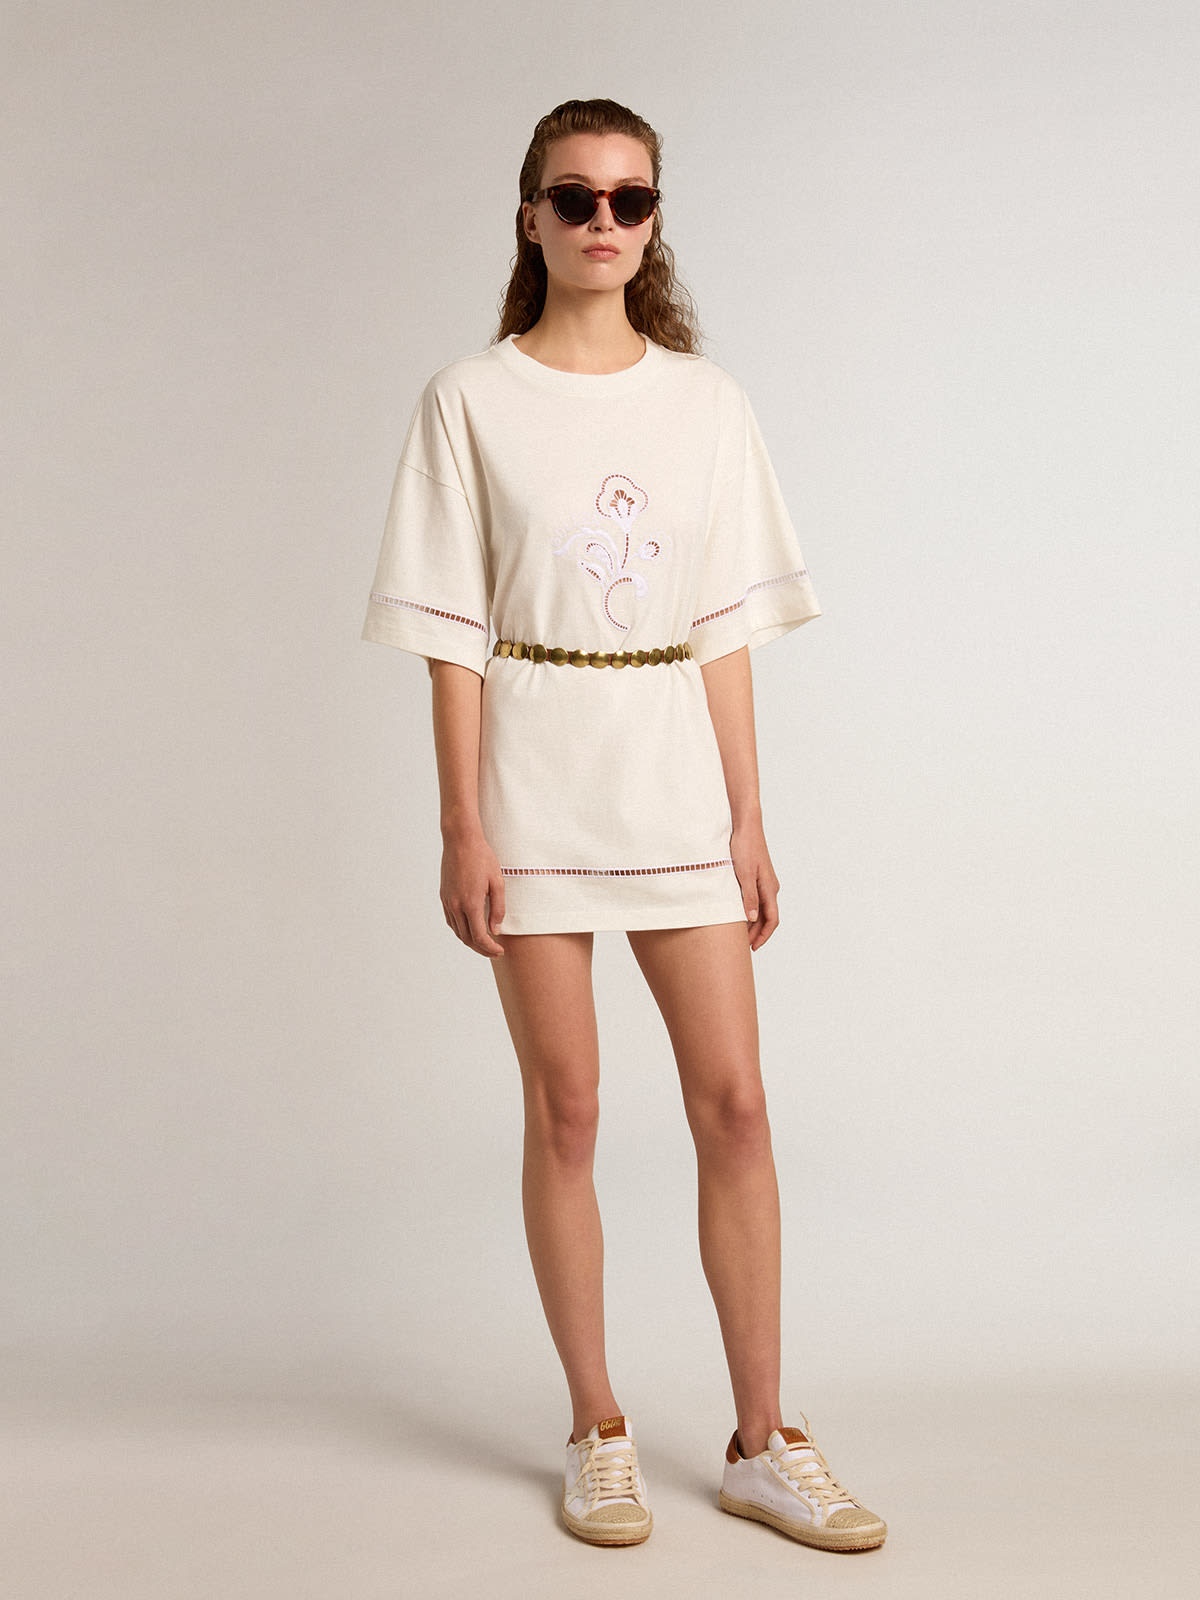 White sweatshirt dress with hood and Golden patch